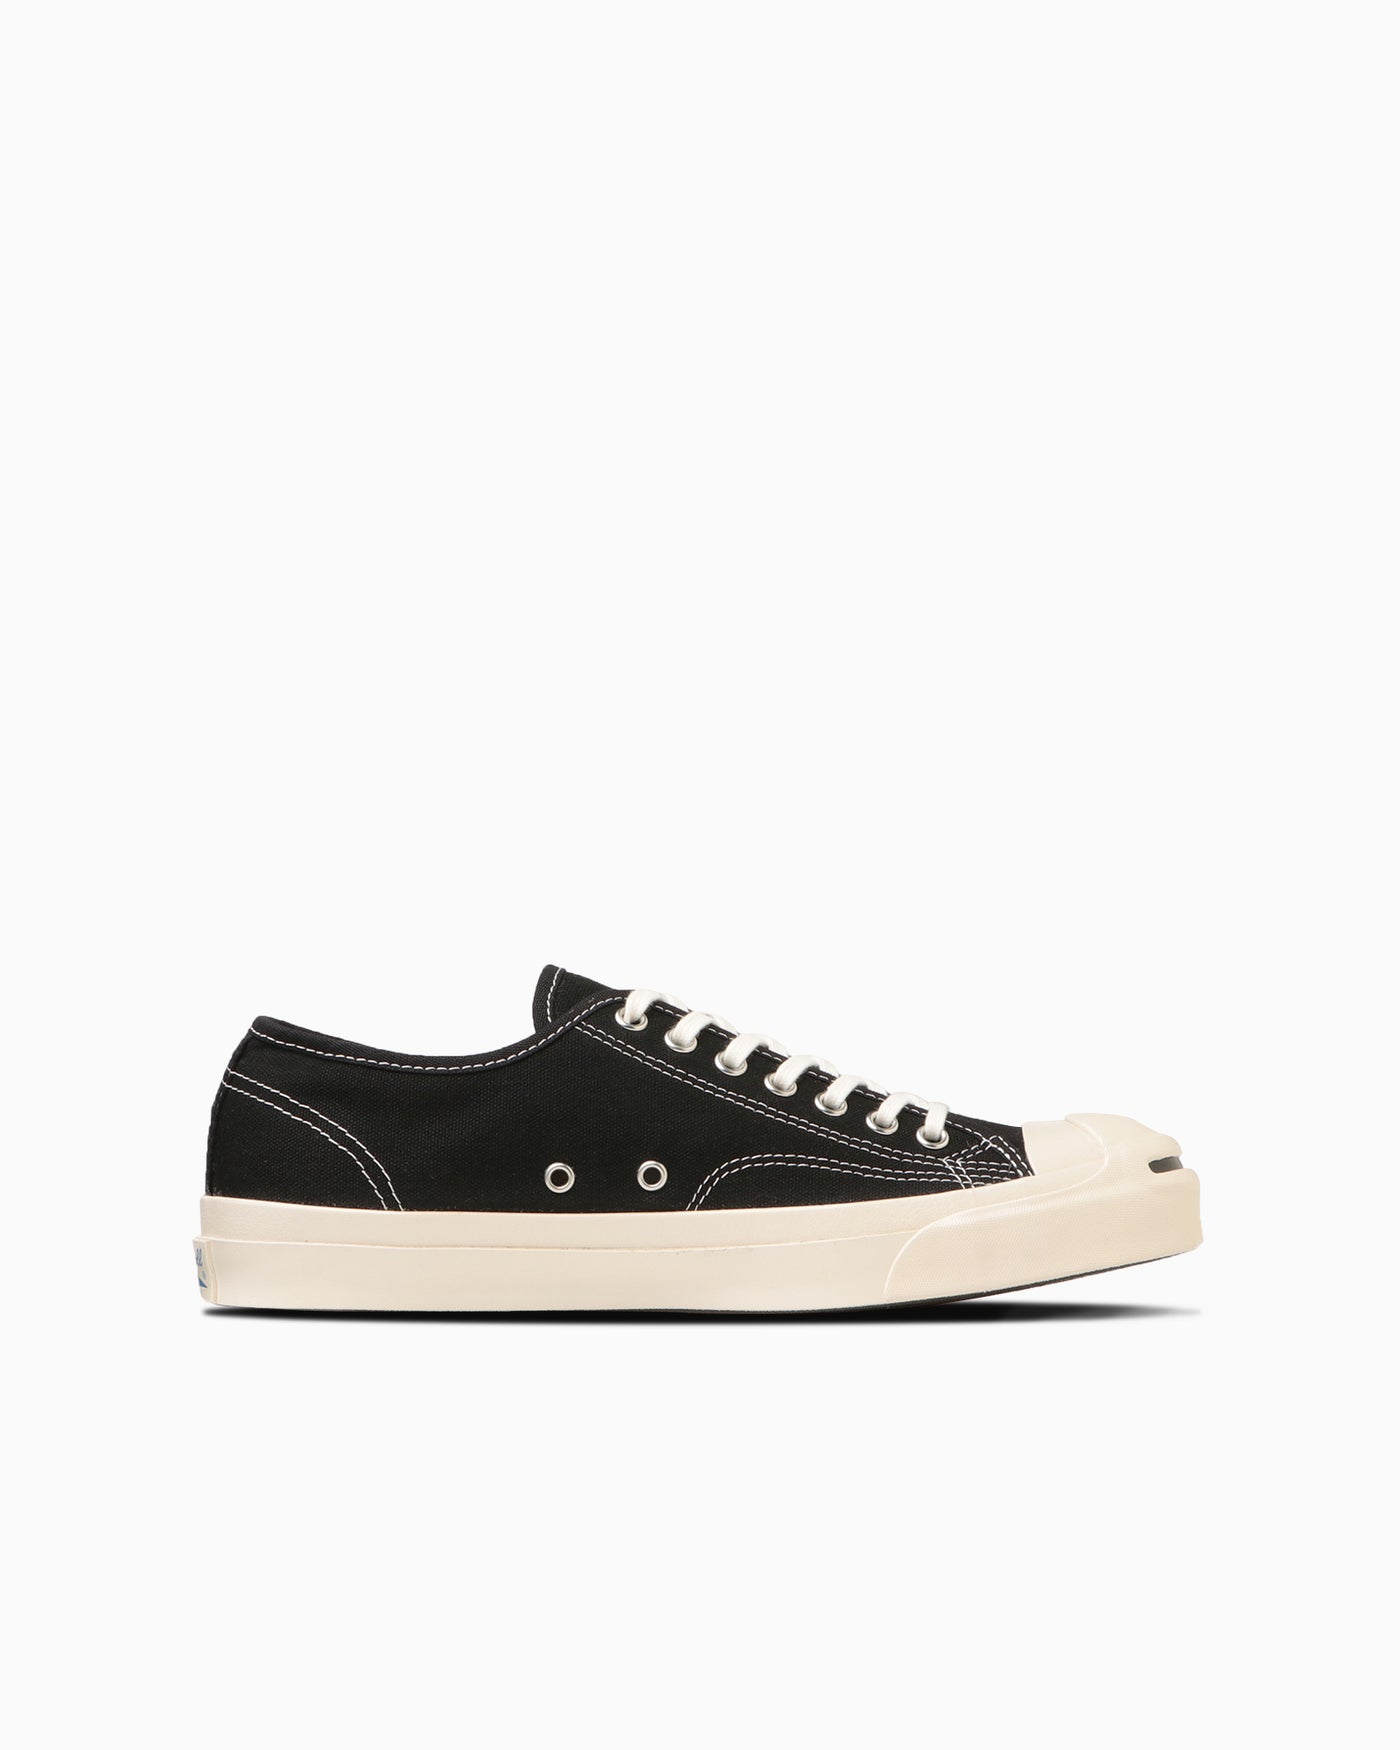 JACK PURCELL US